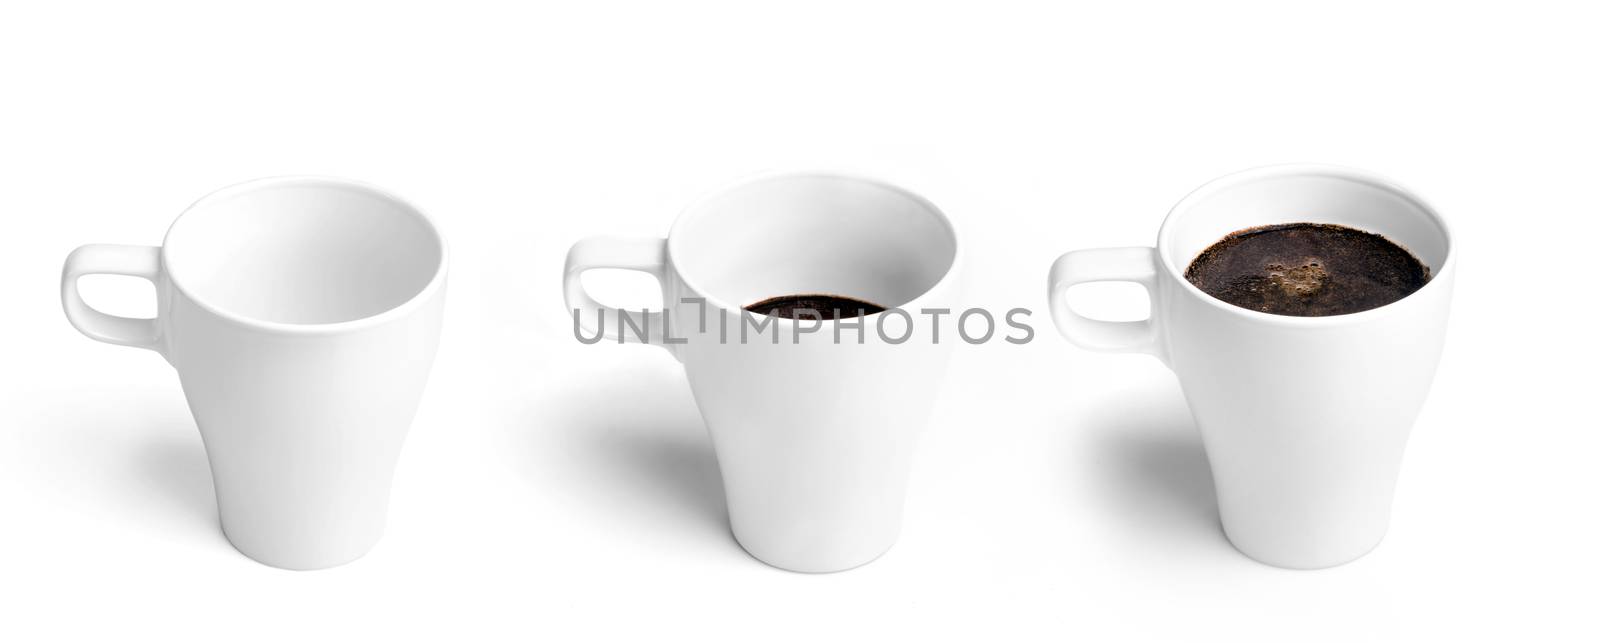 Three cups of coffee, empty, semifull and full one, isolated on white background.